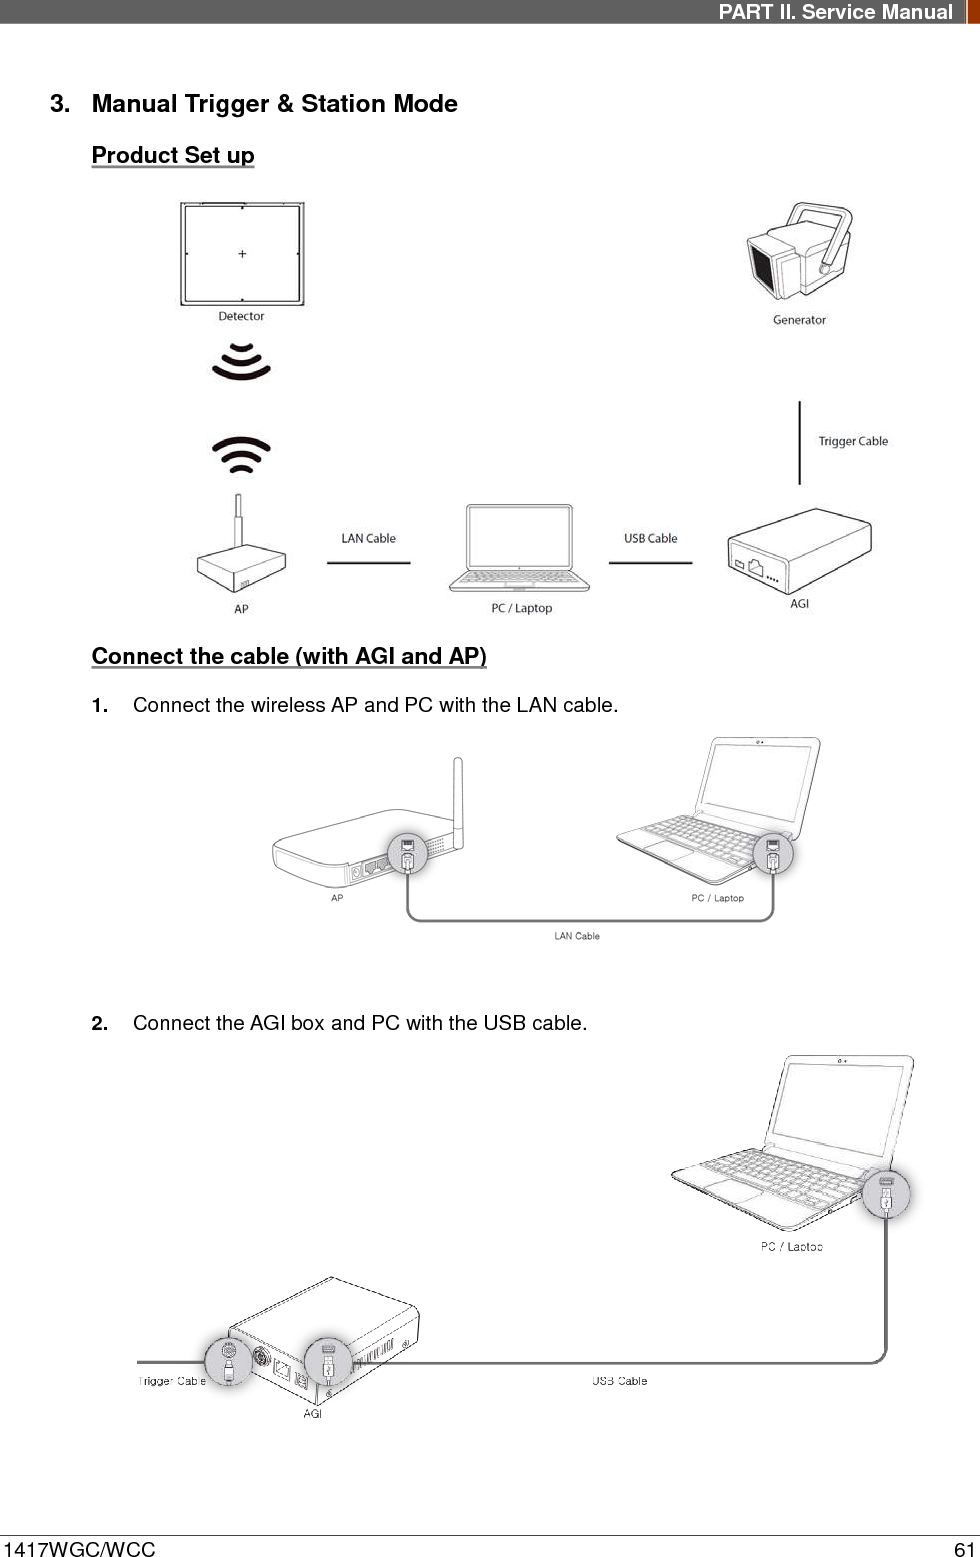 PART II. Service Manual  1417WGC/WCC 61 3. Manual Trigger &amp; Station Mode Product Set up  Connect the cable (with AGI and AP) 1. Connect the wireless AP and PC with the LAN cable.   2. Connect the AGI box and PC with the USB cable.     